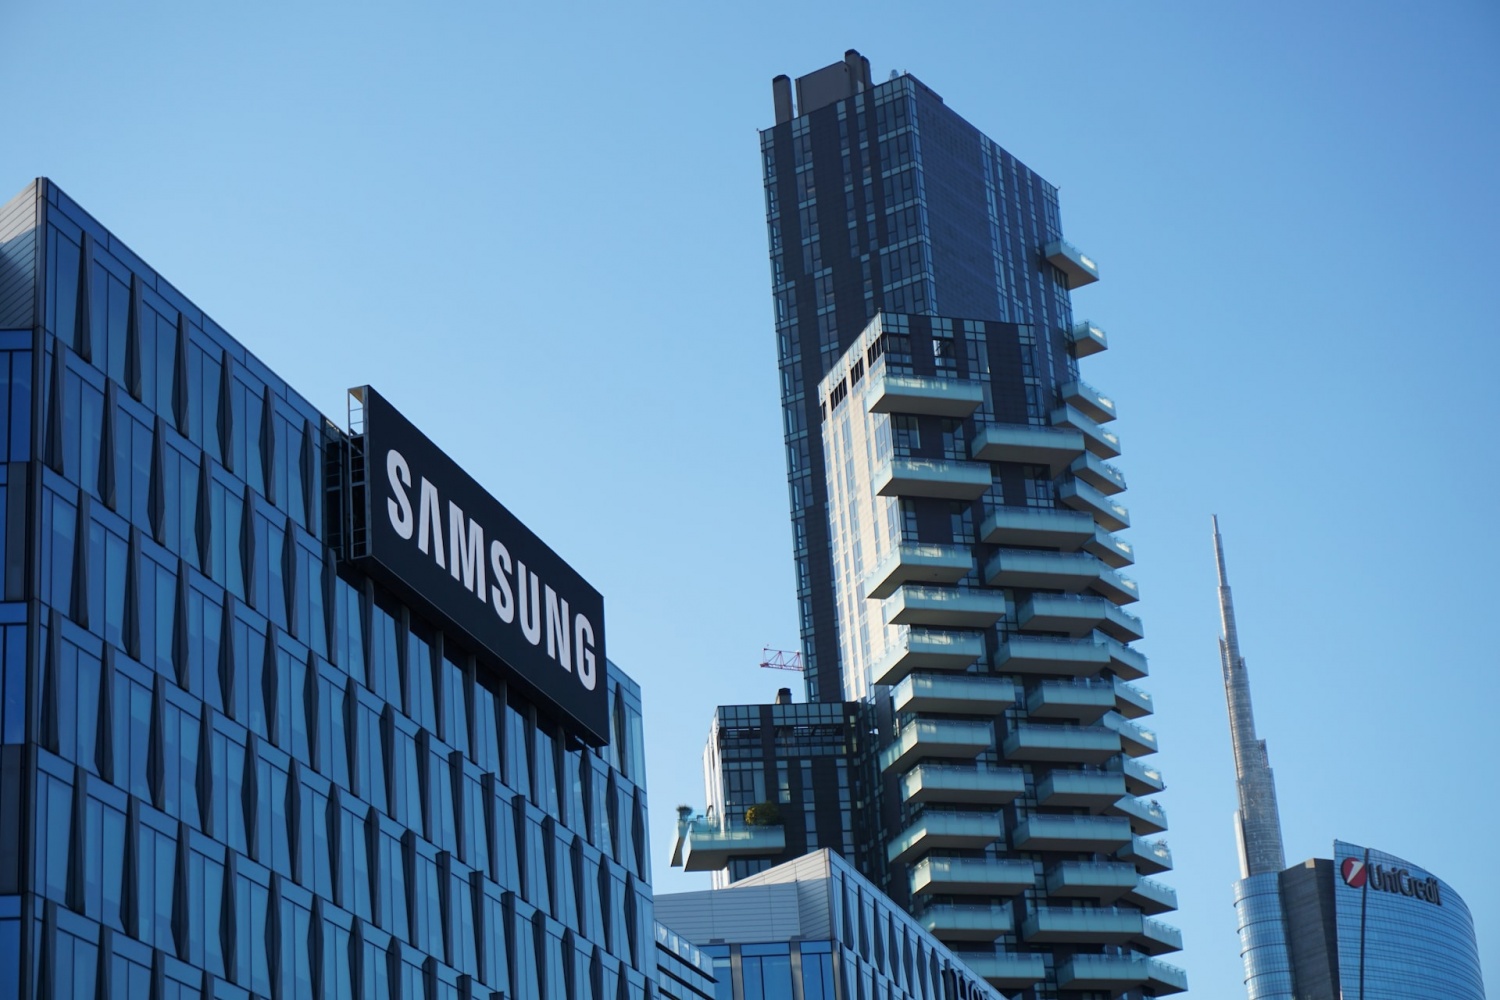 Rumor Says Samsung is Working on ‘Galaxy Dedicated Chip,’ Potentially Phasing Out the Qualcomm SoCs